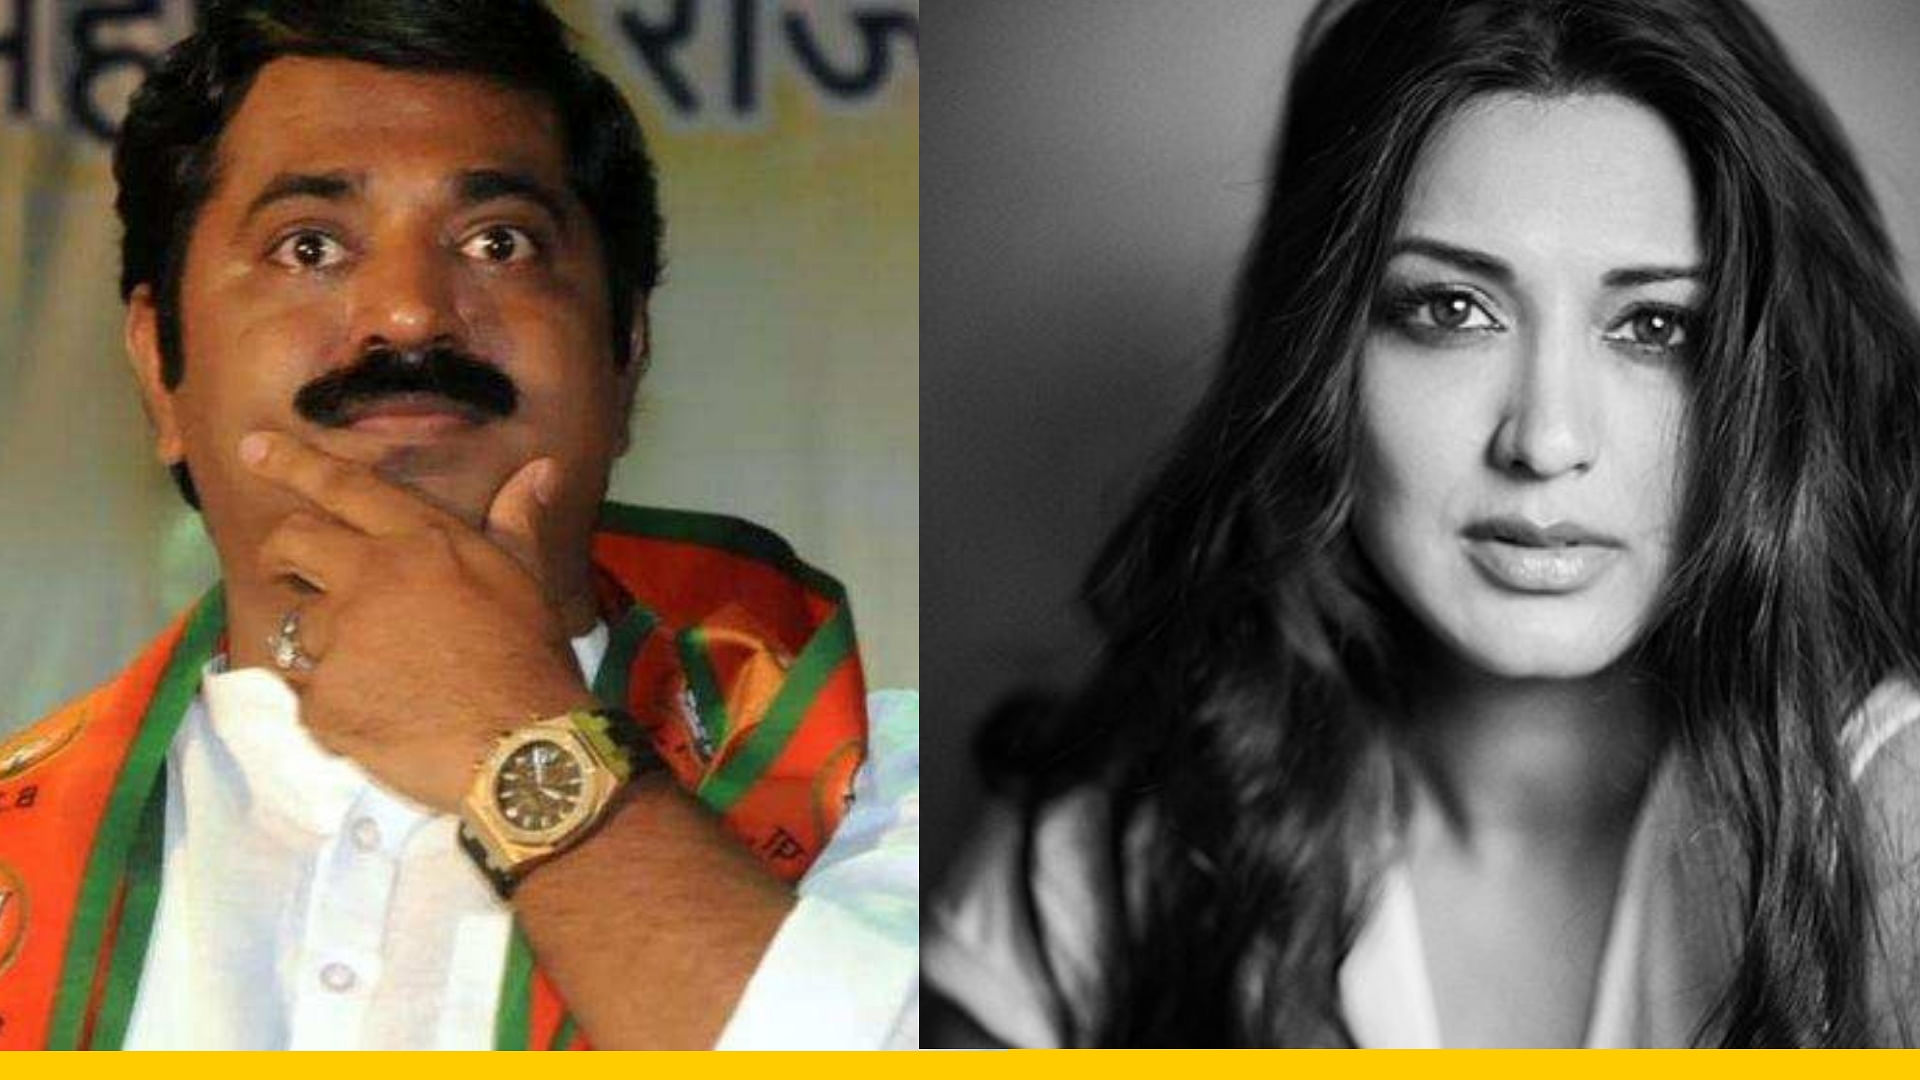 BJP MLA Ram Kadam, under fire over his “will kidnap girl” remarks, was caught on the wrong foot again Friday, 7 September, after he tweeted that Bollywood actor Sonali Bendre was no more.